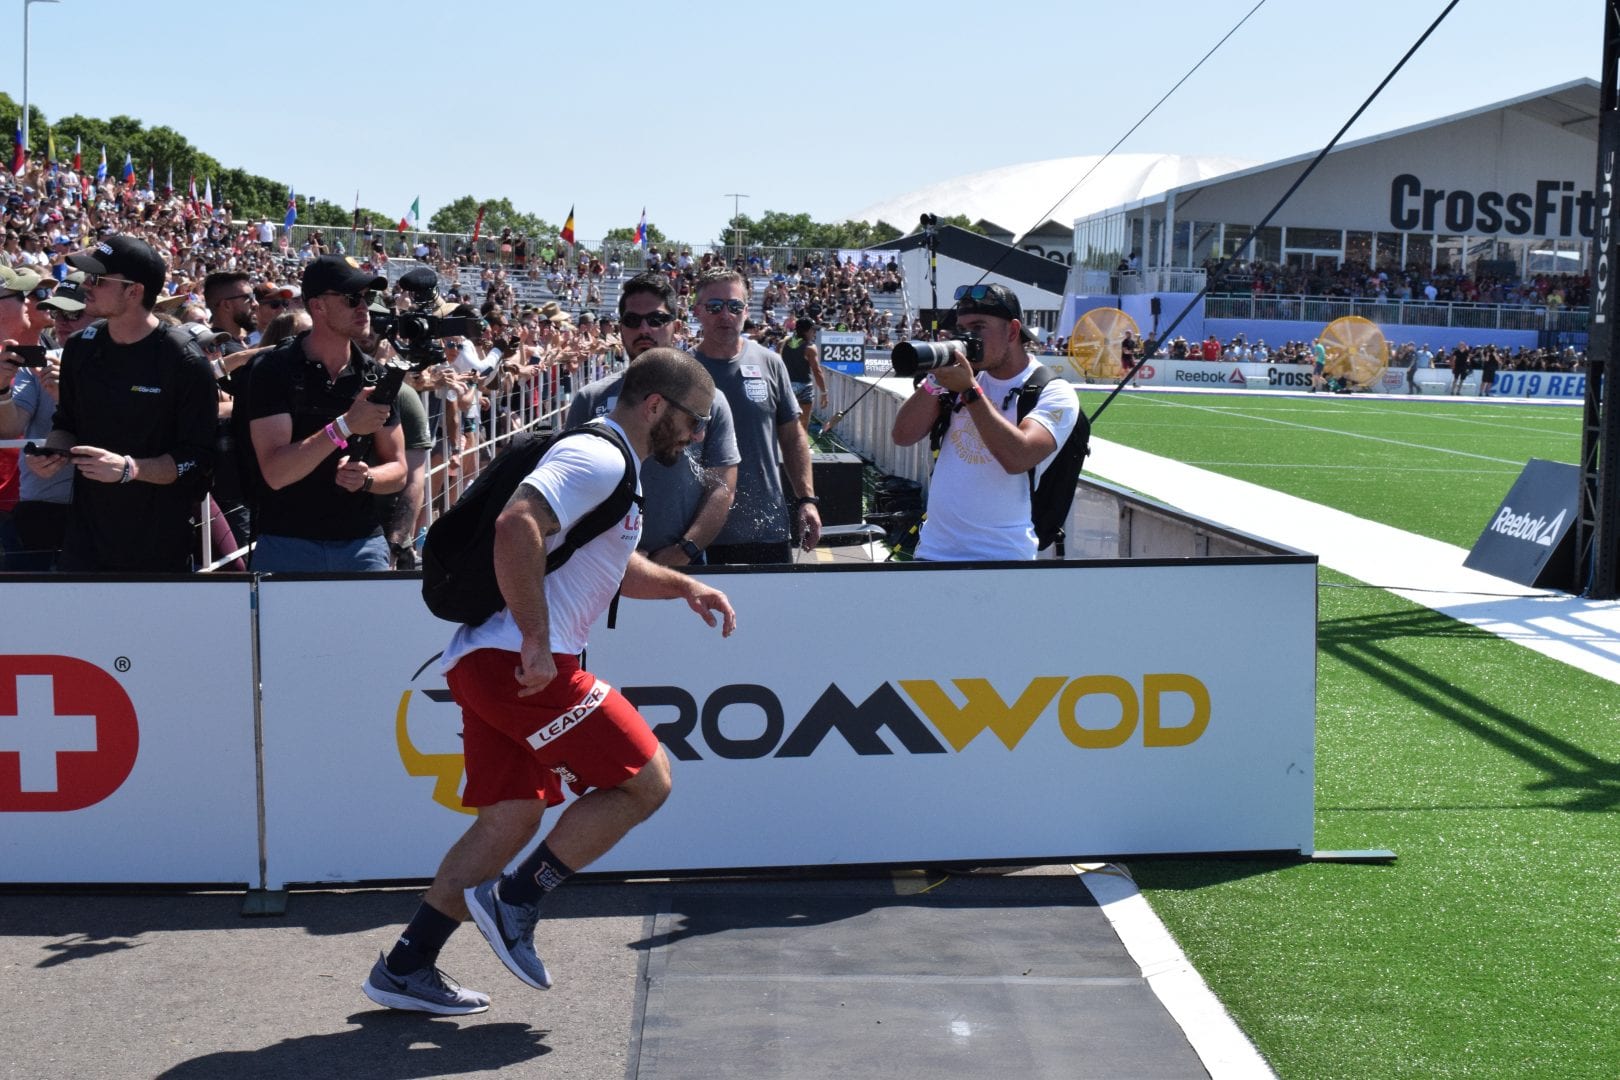 Mat Fraser nears the finish line of the Ruck Run event at the 2019 CrossFit Games. He would receive a penalty for dropping a weight as he rounded one of the last corners.